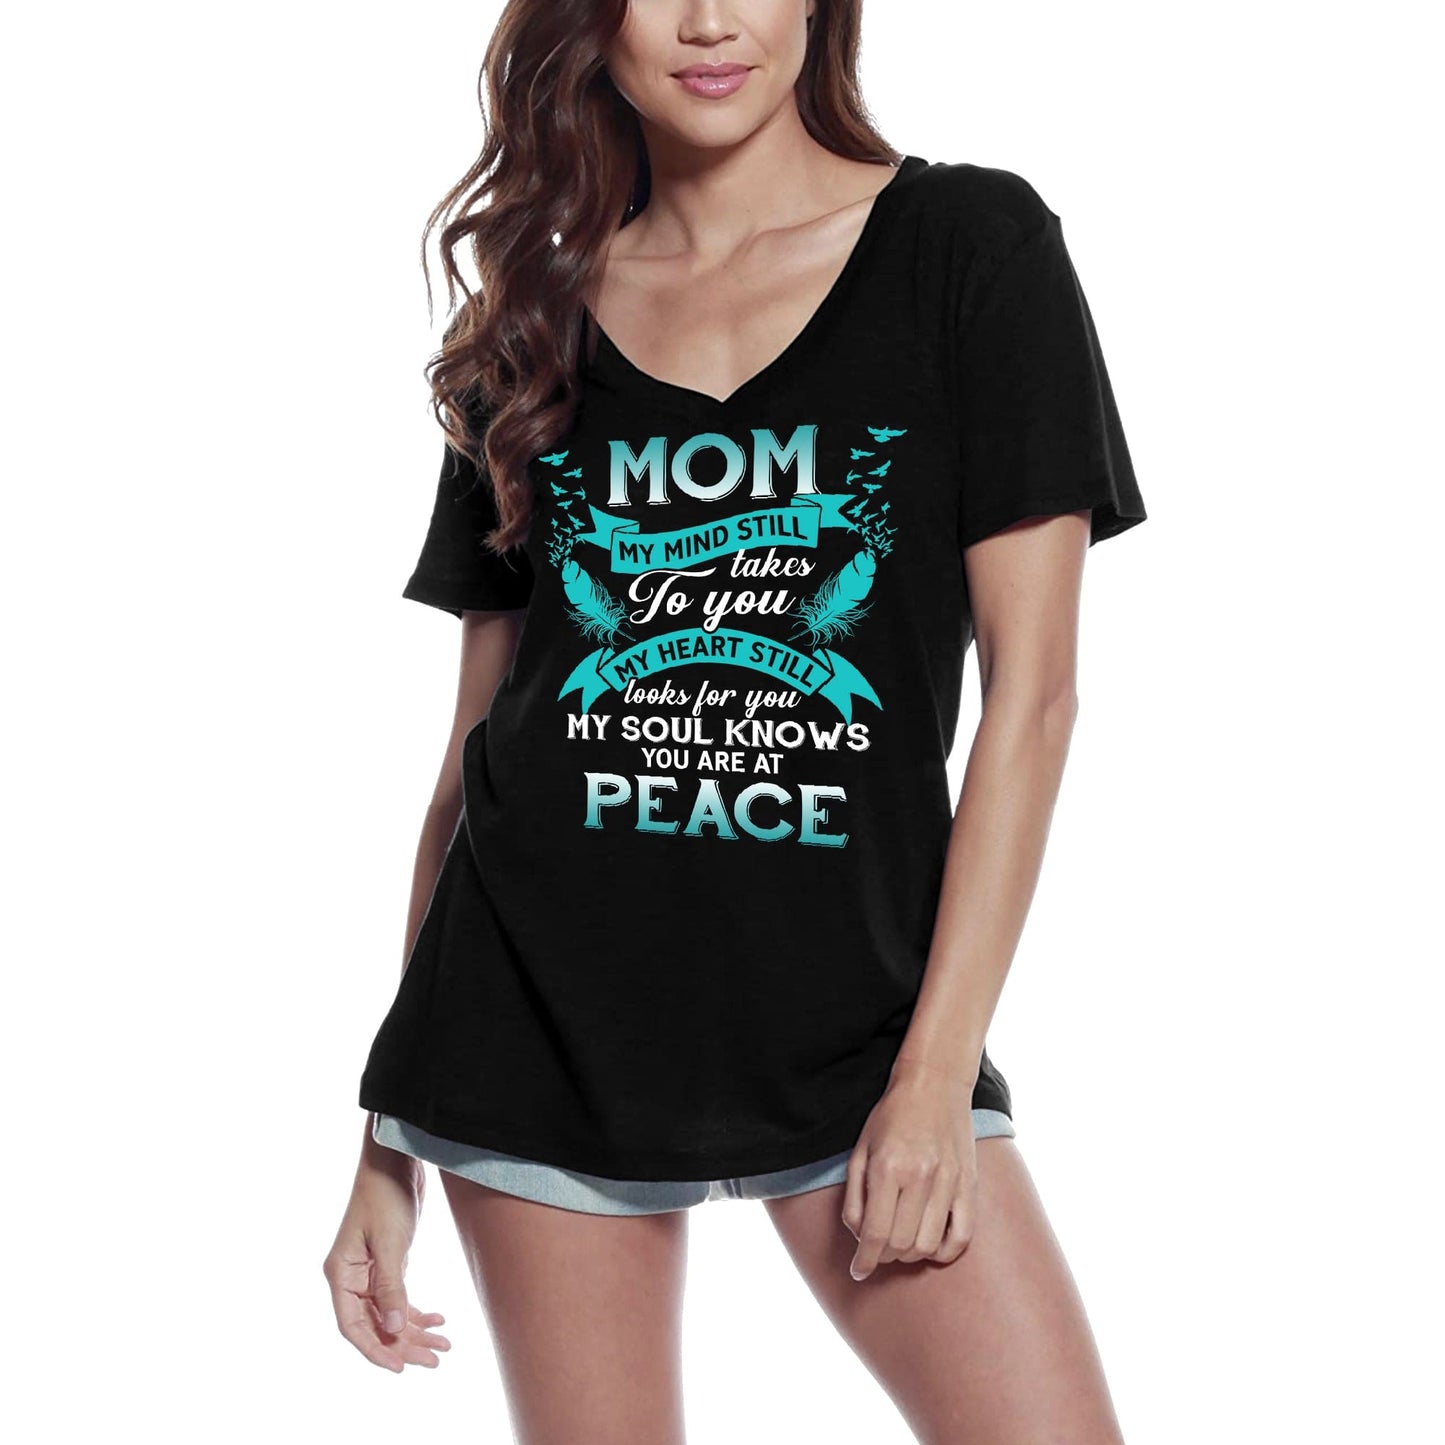 ULTRABASIC Women's T-Shirt Mom My Mind Still Takes to You - Peace Mother Tee Shirt